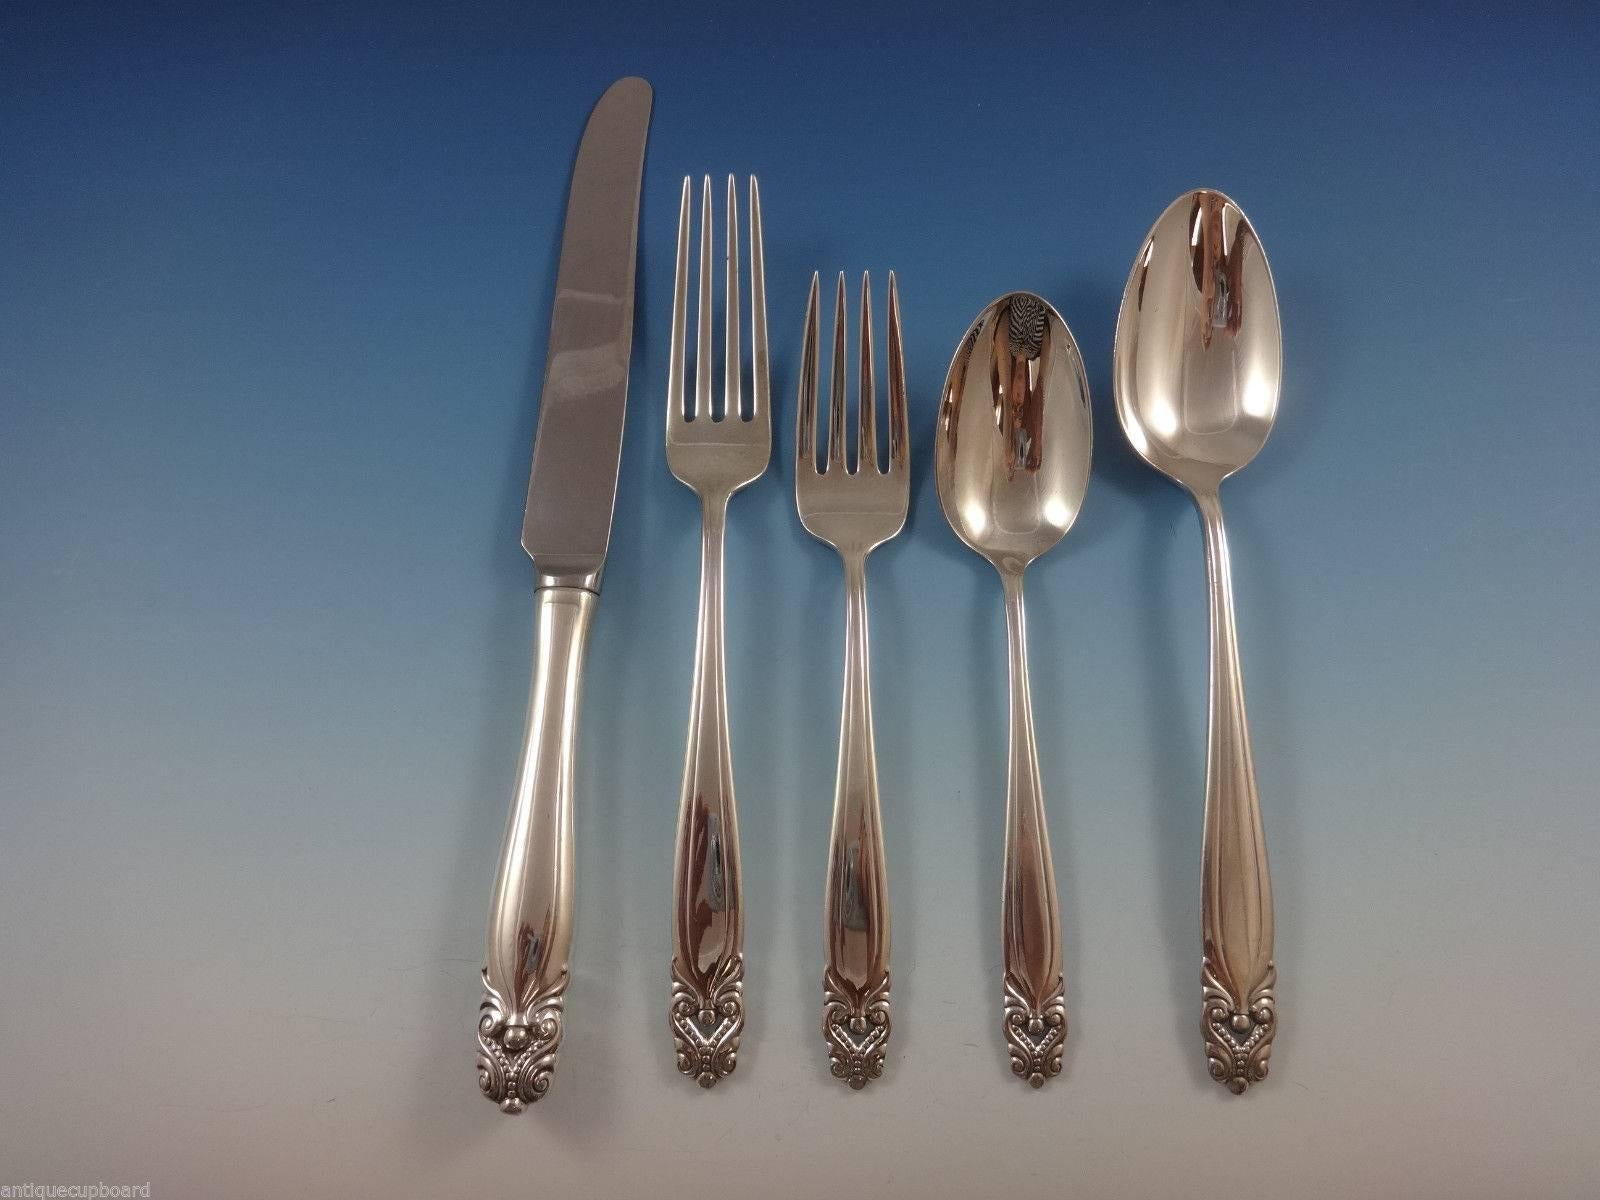 Stunning King Christian by Wallace sterling silver flatware set, 67 pieces. This set includes:

12 knives, 9